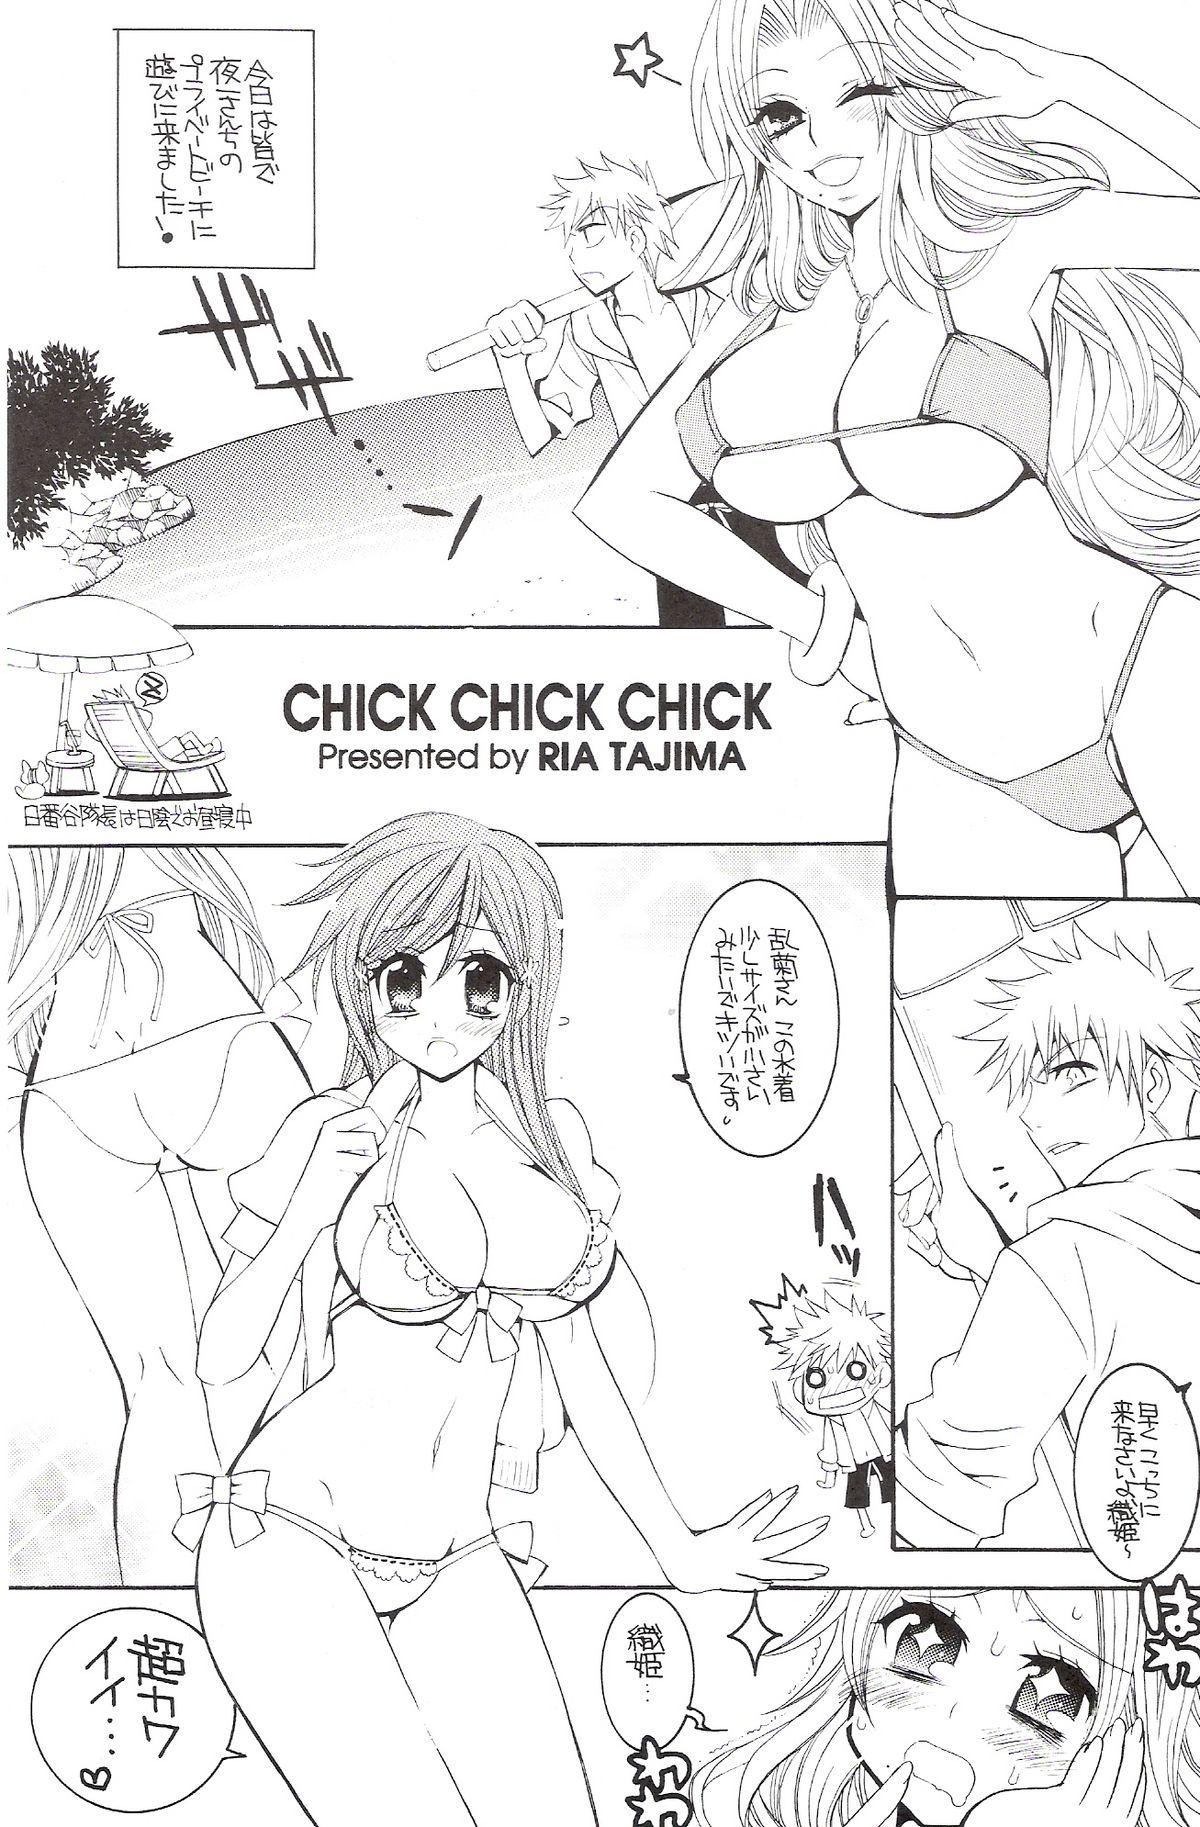 Animation CHICK CHICK CHICK - Bleach Amateur Blowjob - Page 4